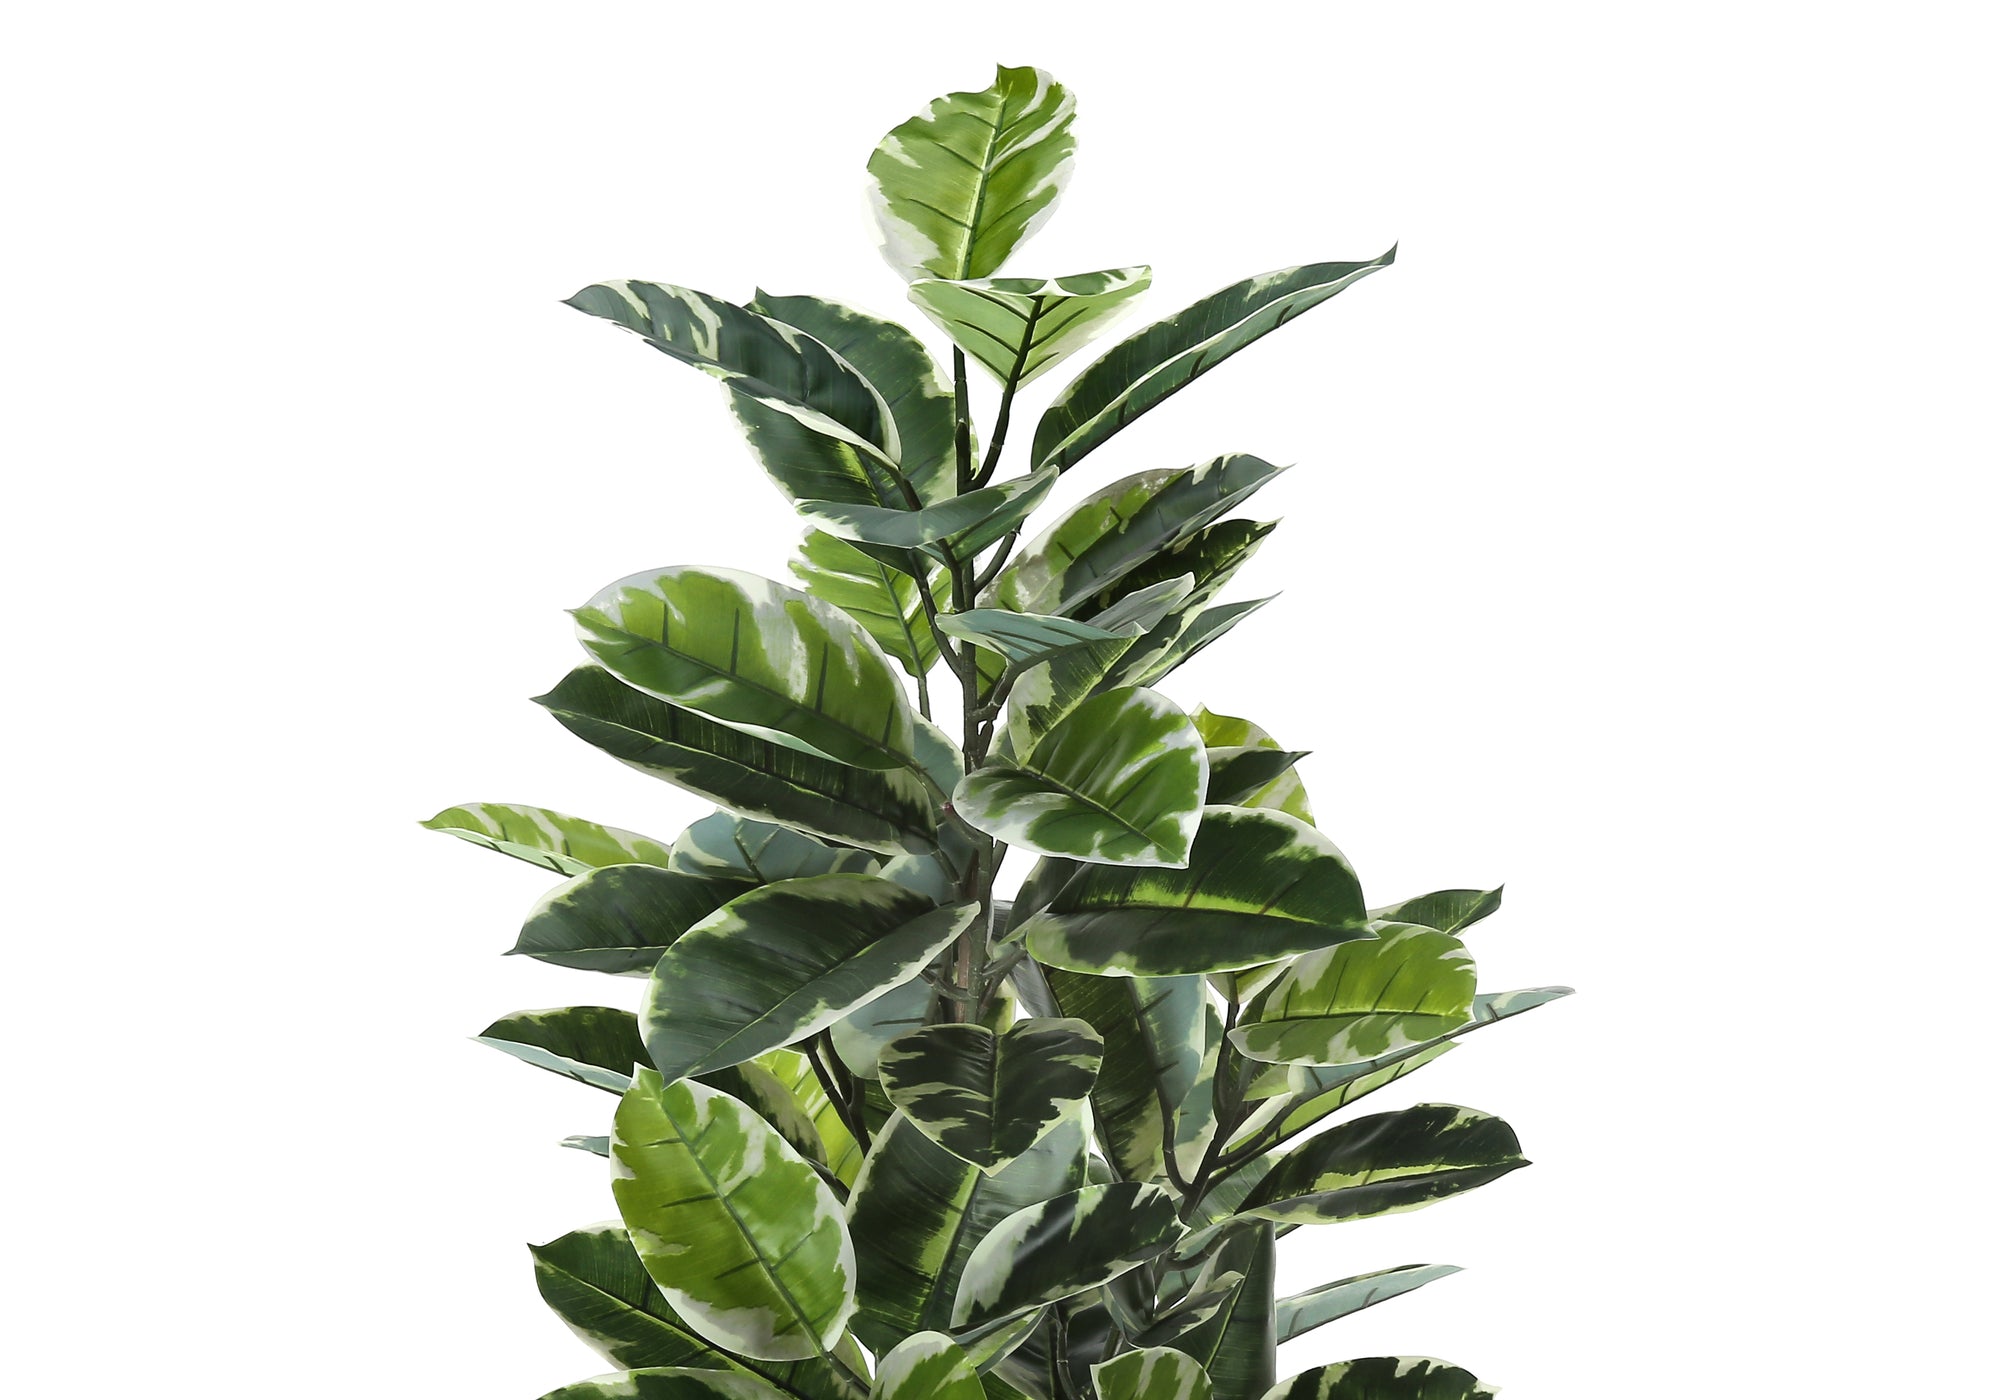 MN-349513    Artificial Plant, 52" Tall, Rubber Tree, Indoor, Faux, Fake, Floor, Greenery, Potted, Real Touch, Decorative, Green Leaves, Black Pot